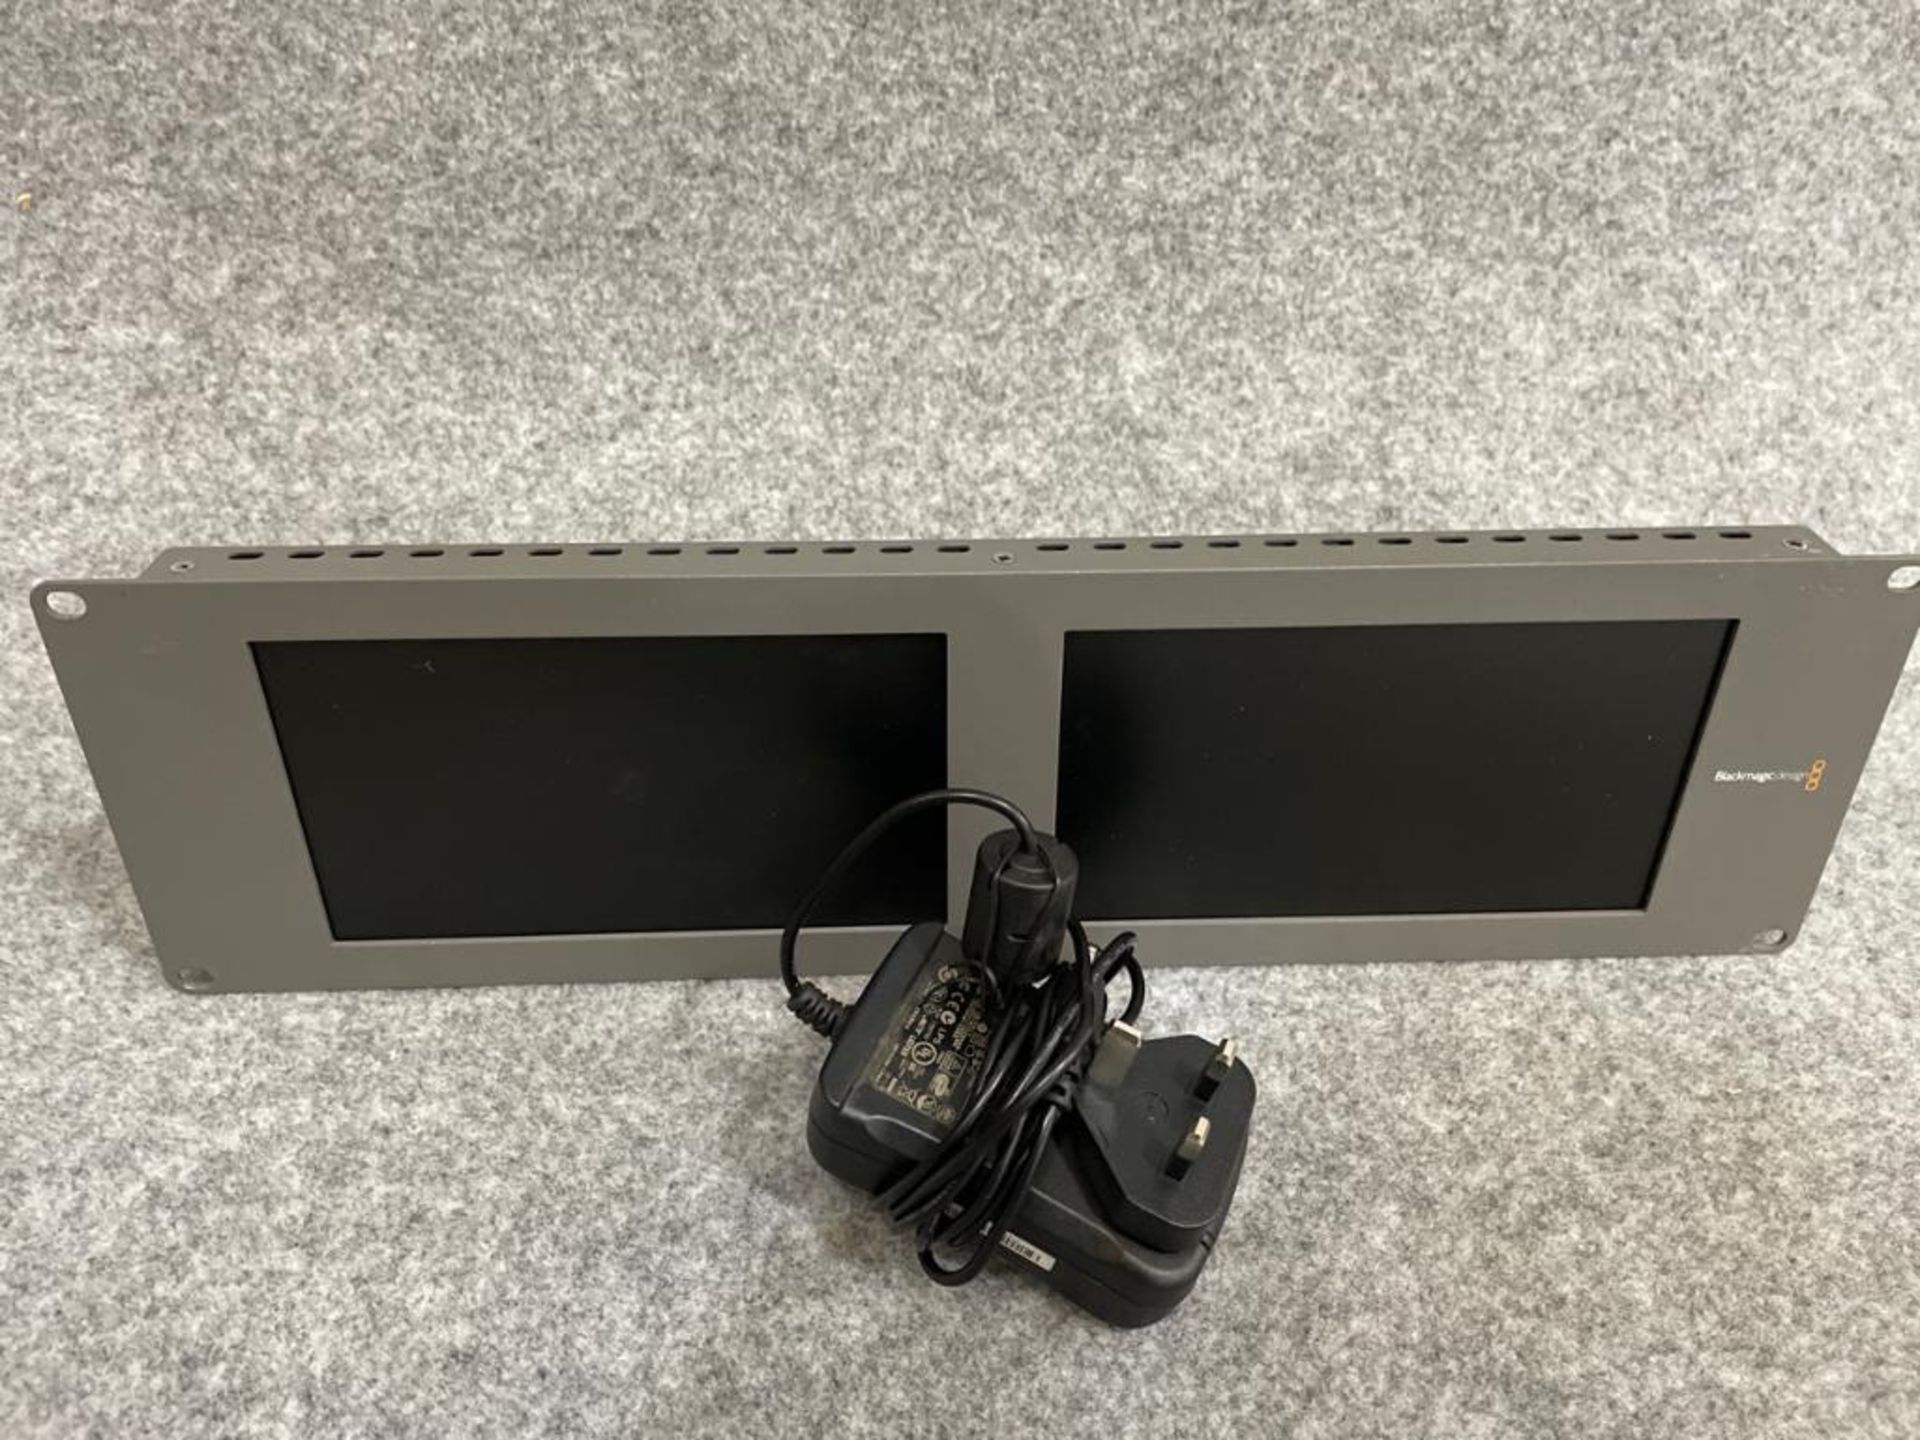 BlackMagic Dual HD Monitor with power supply SN: 1390764 - Image 3 of 3